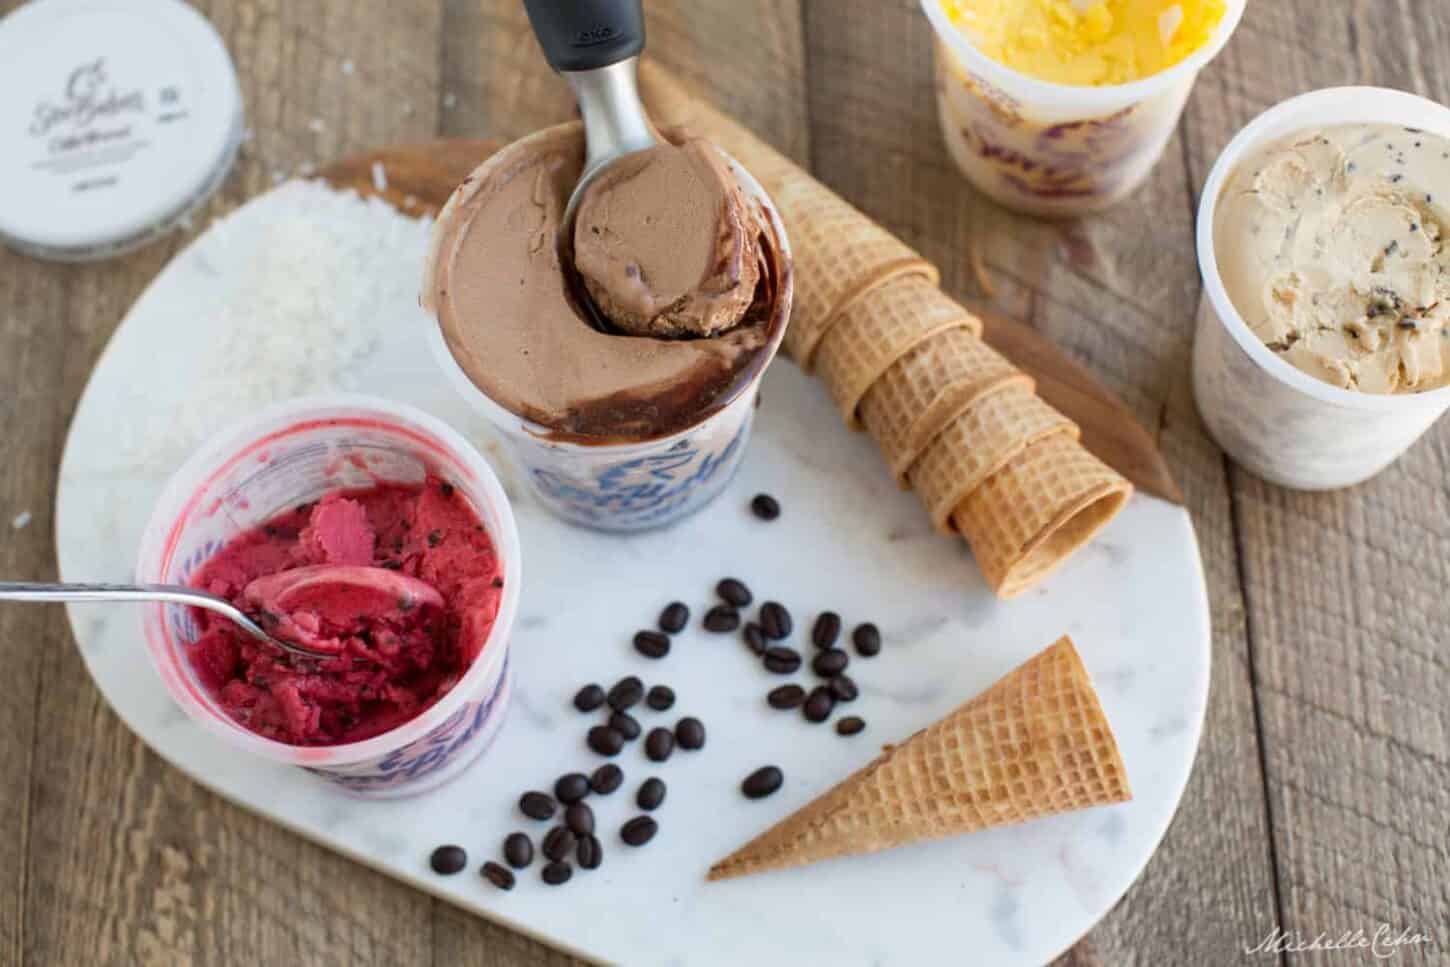 Pints of dairy-free ice cream with waffle cones.